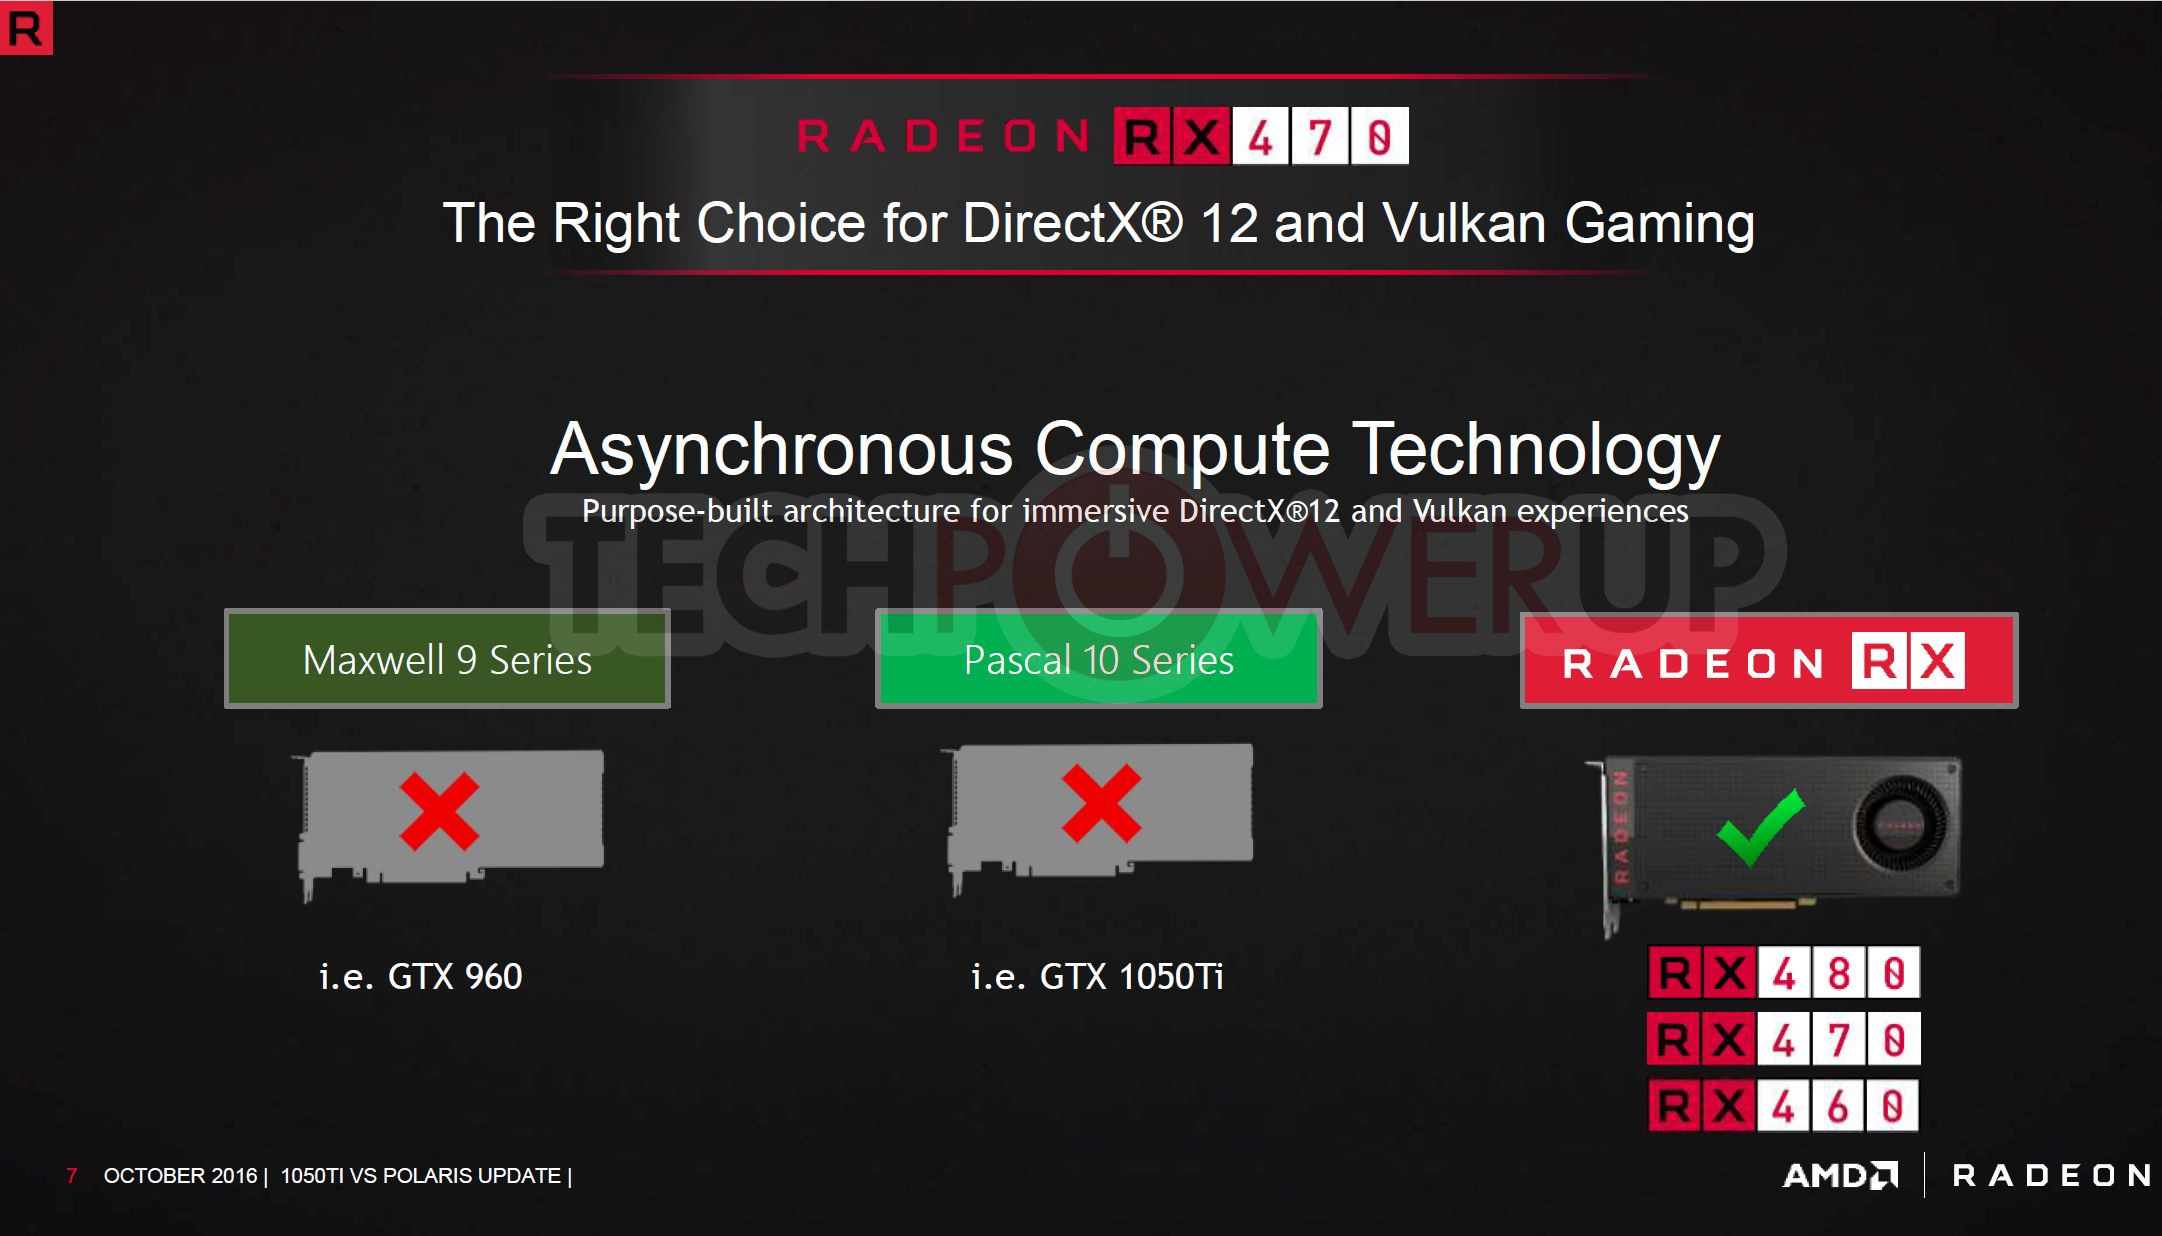 AMD Wants You to Choose Radeon RX 470 